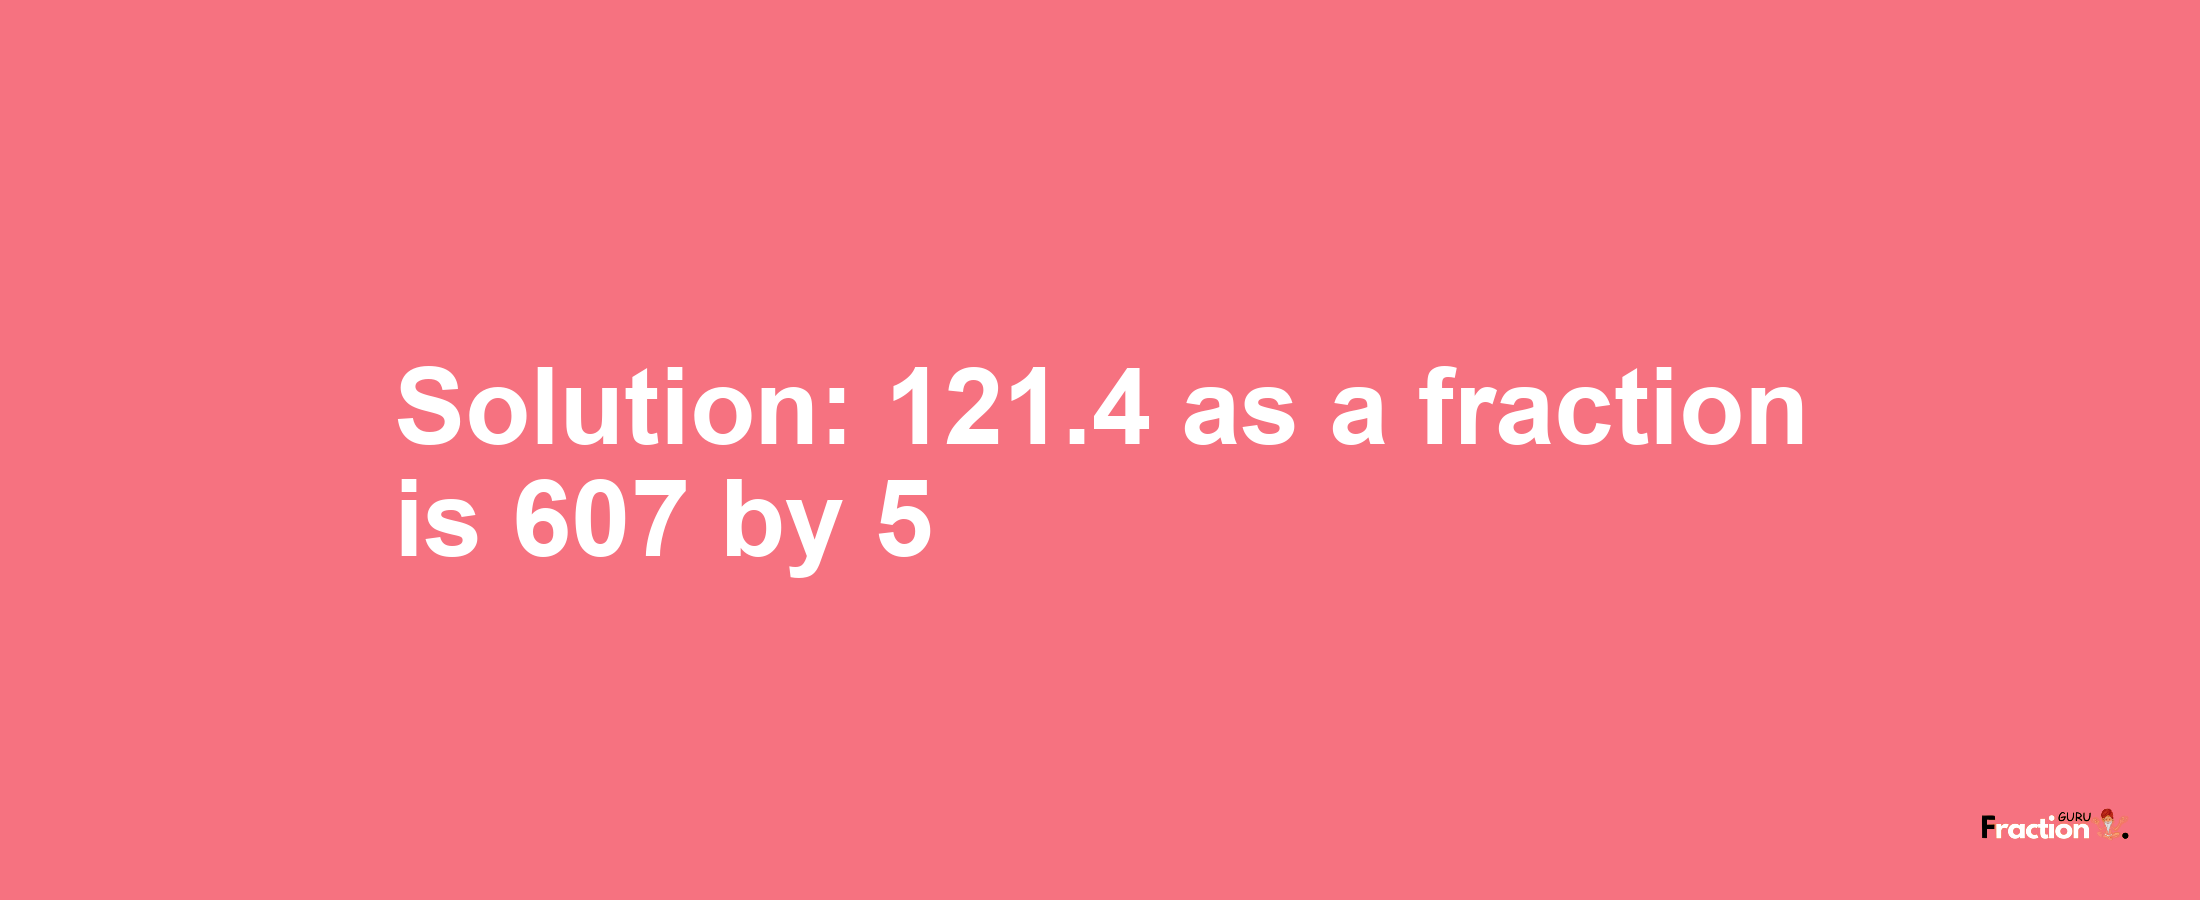 Solution:121.4 as a fraction is 607/5